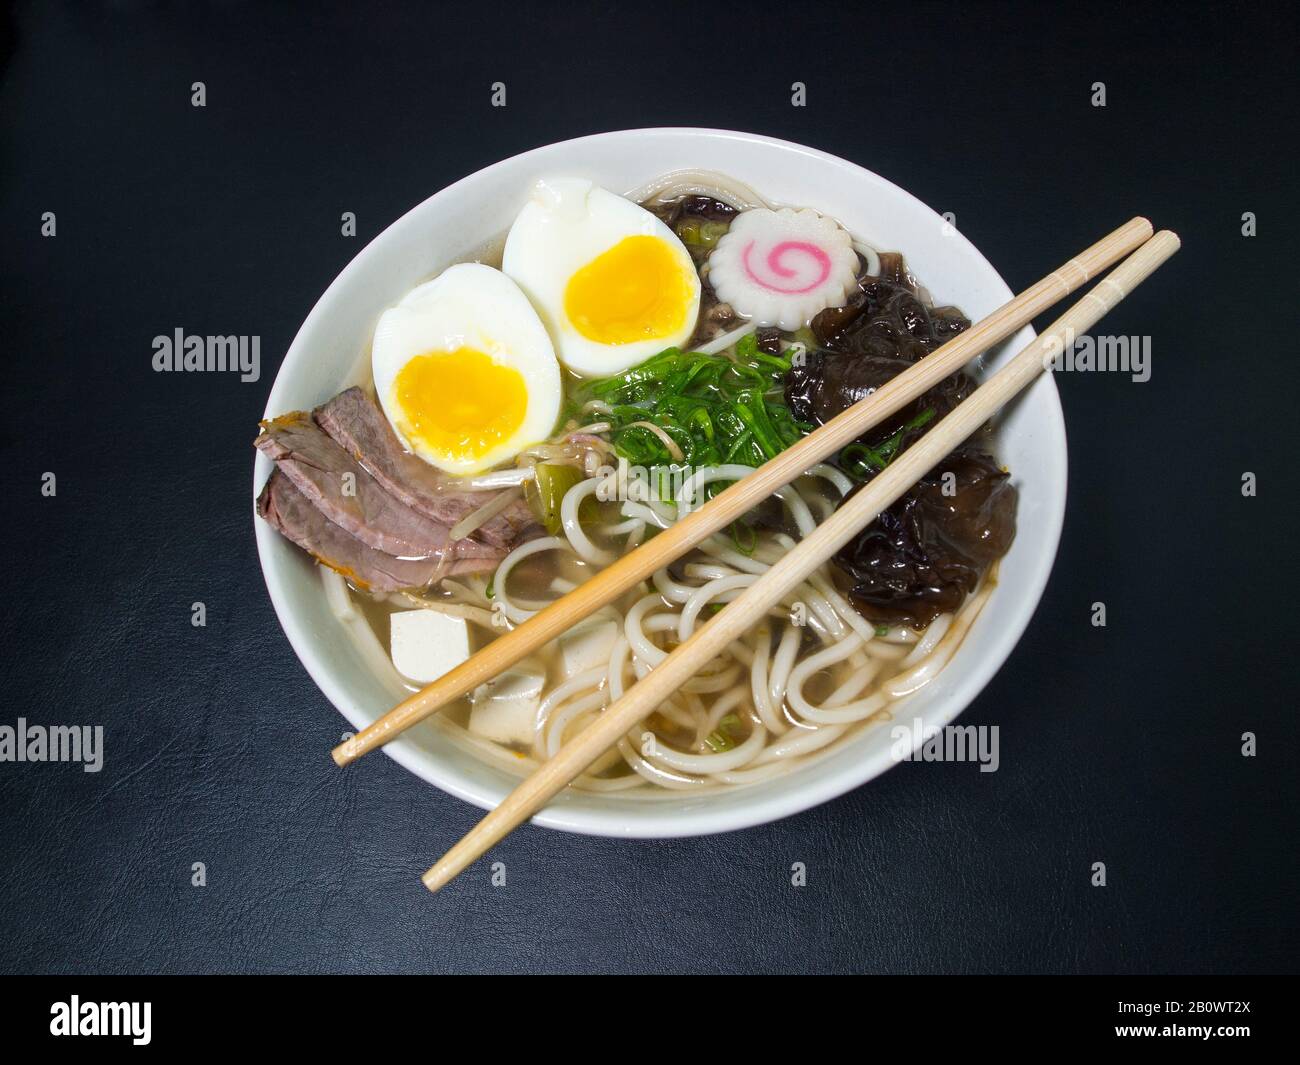 Ramen: Asian noodle soup with beef, eggs, fungi, vegetables, tofu, seaweed and naruto with chopsticks on the bowl. Black background. Top view. Stock Photo